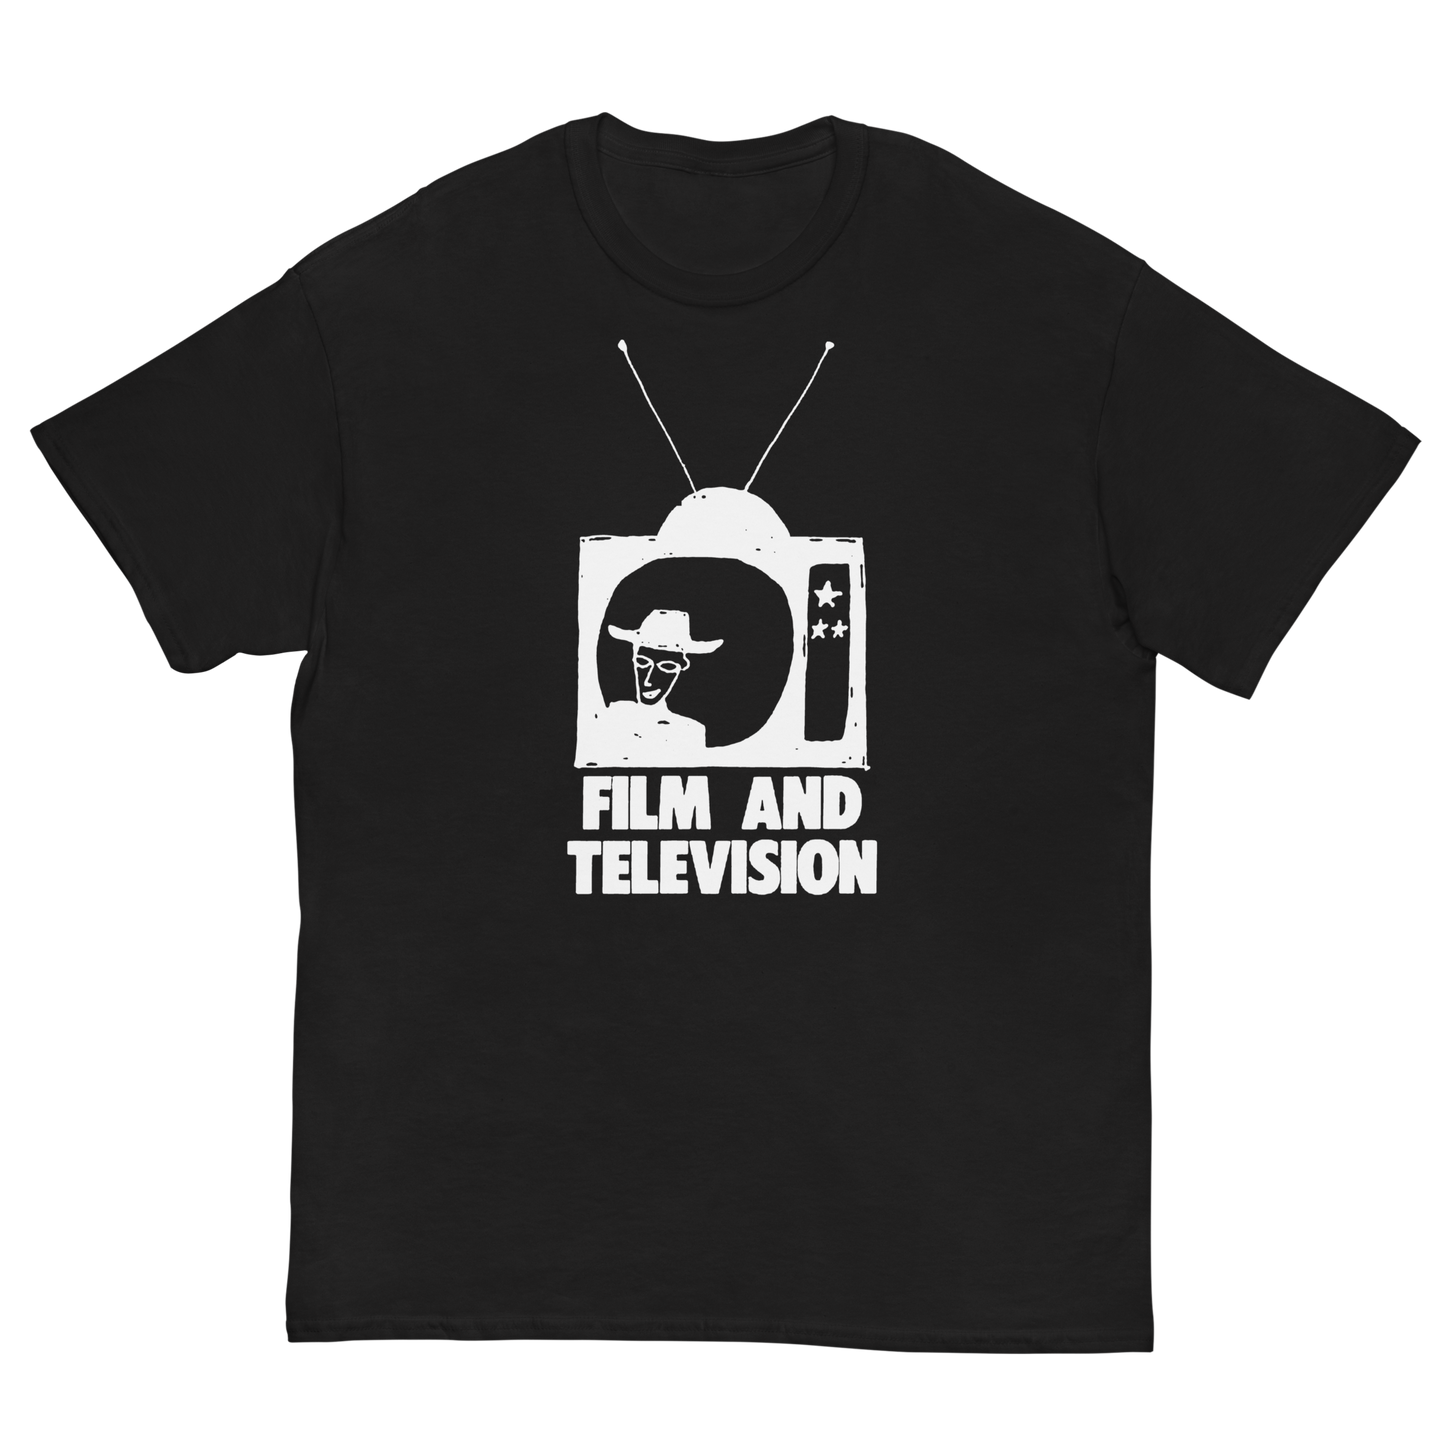 FILM AND TV T-SHIRT